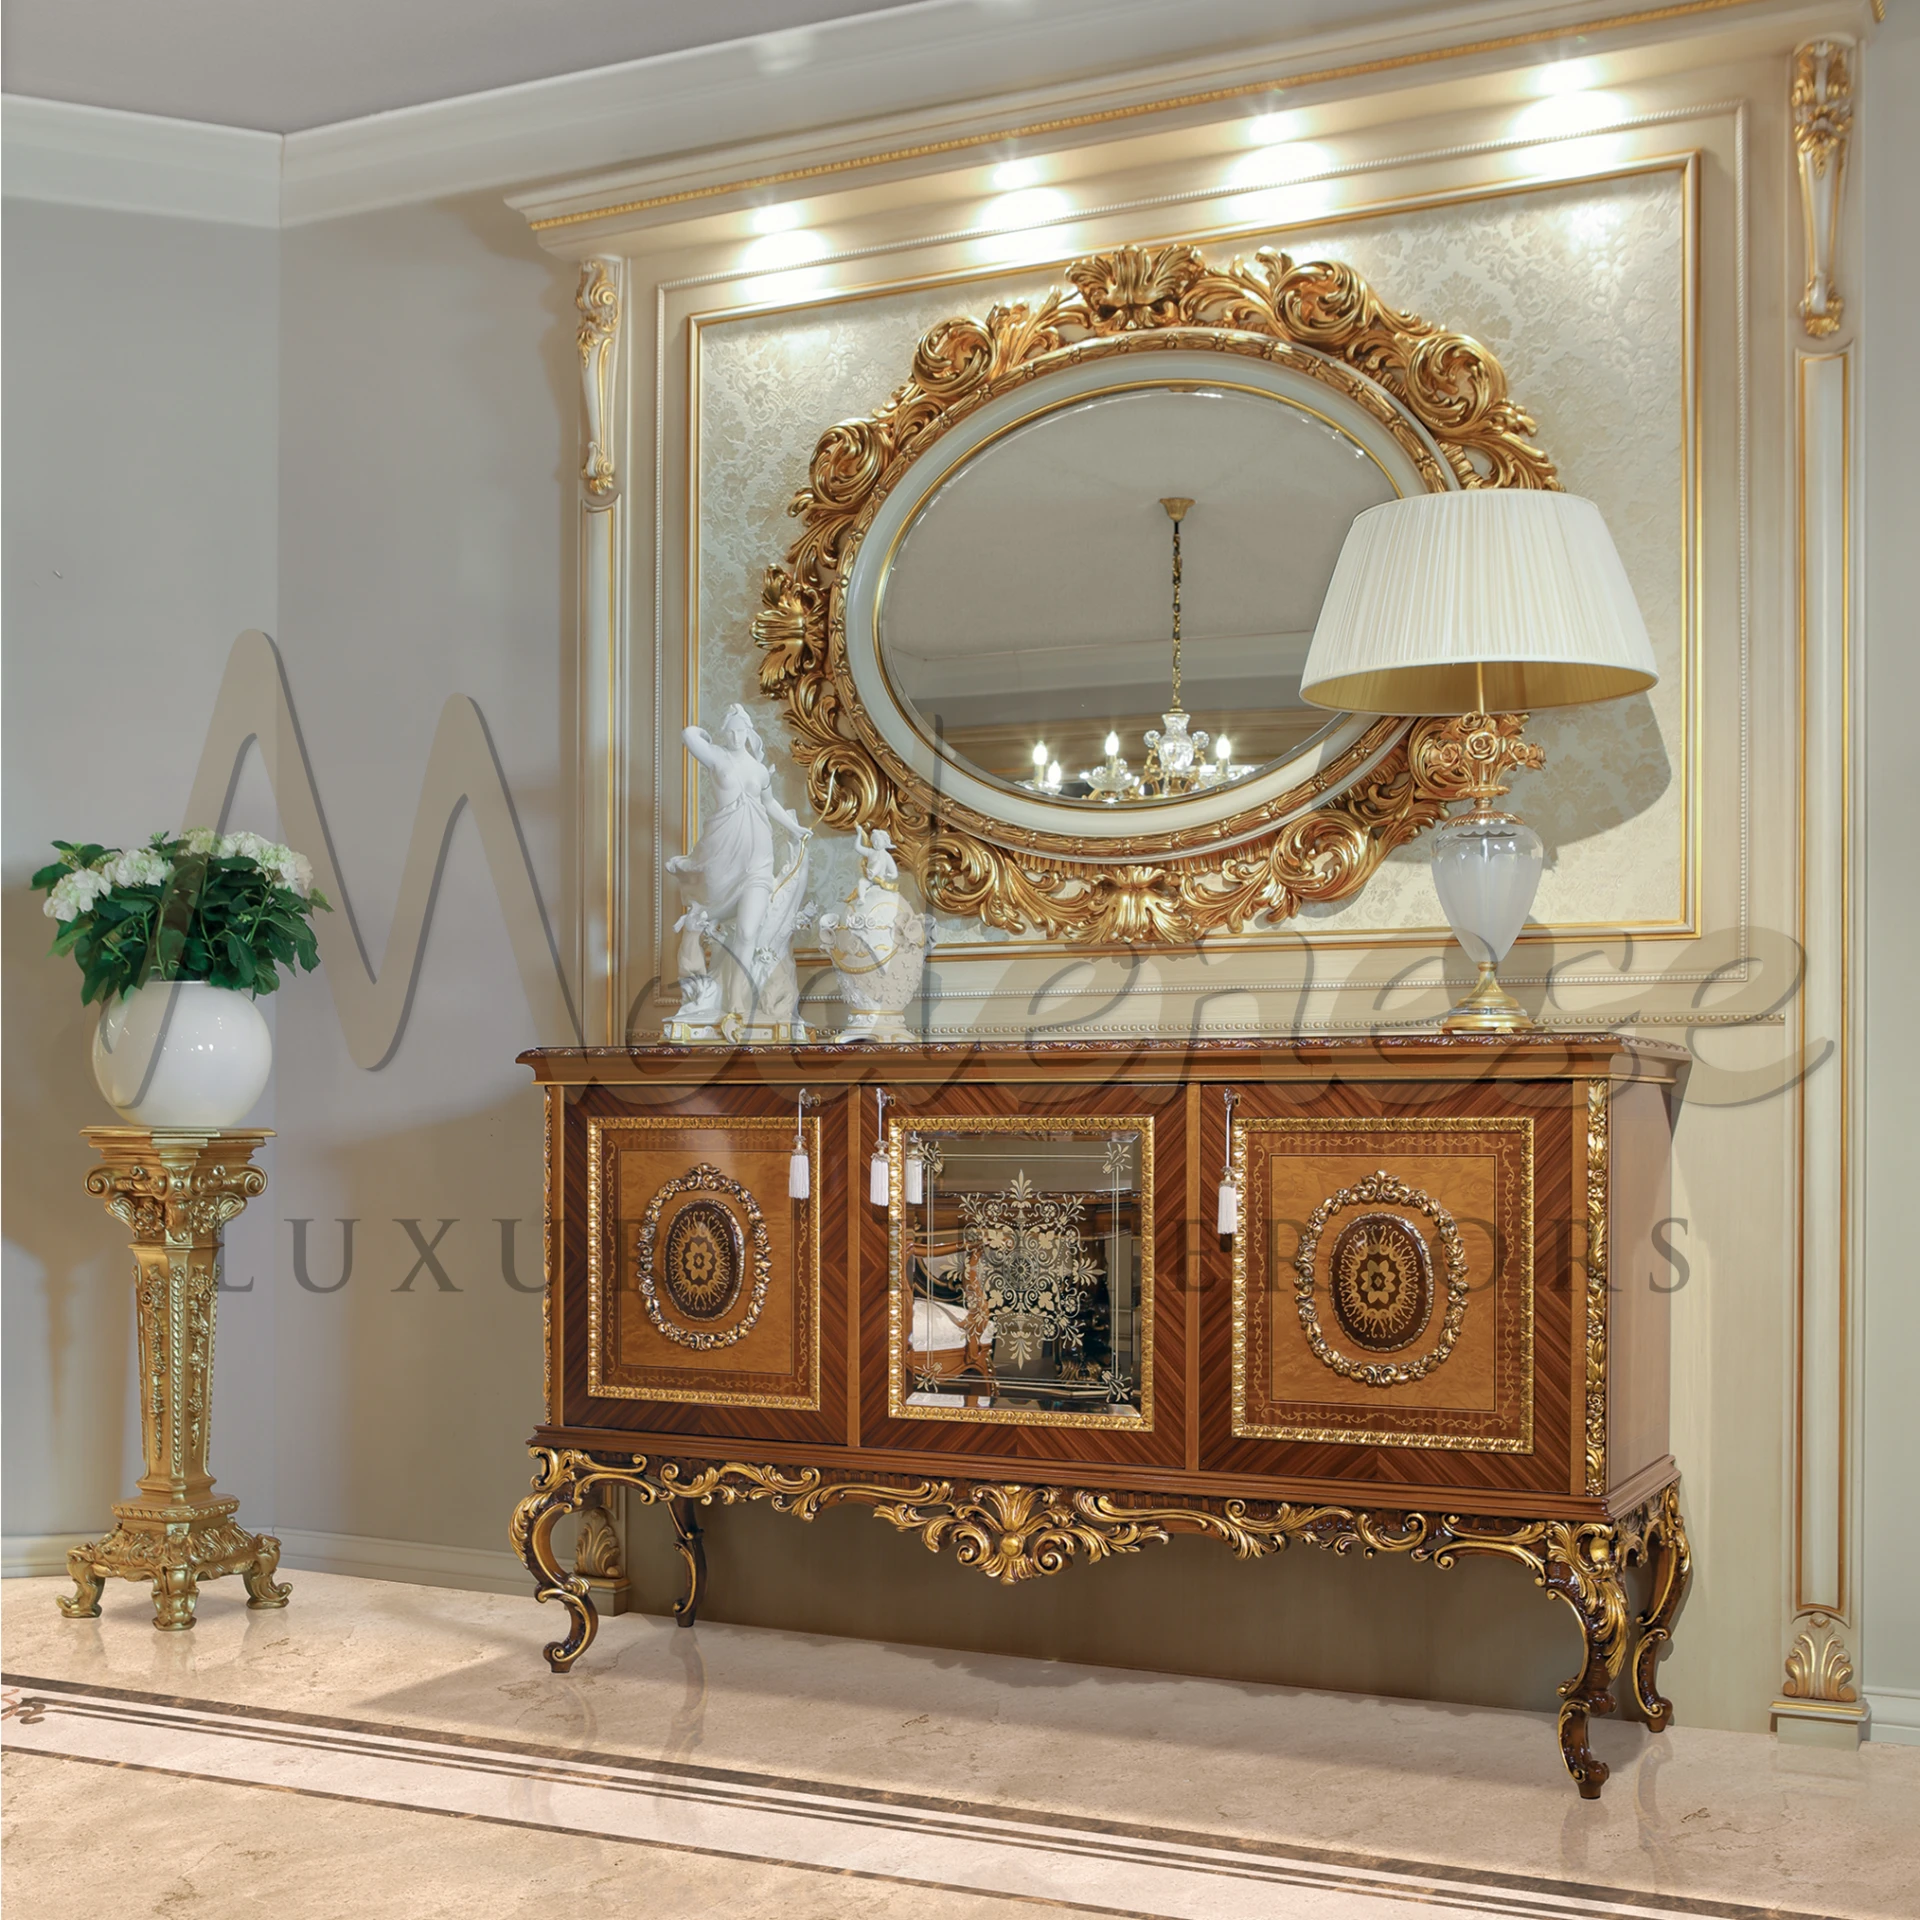 European style vase stand in baroque design, handcrafted with gold leaf, elevates luxury home decor.